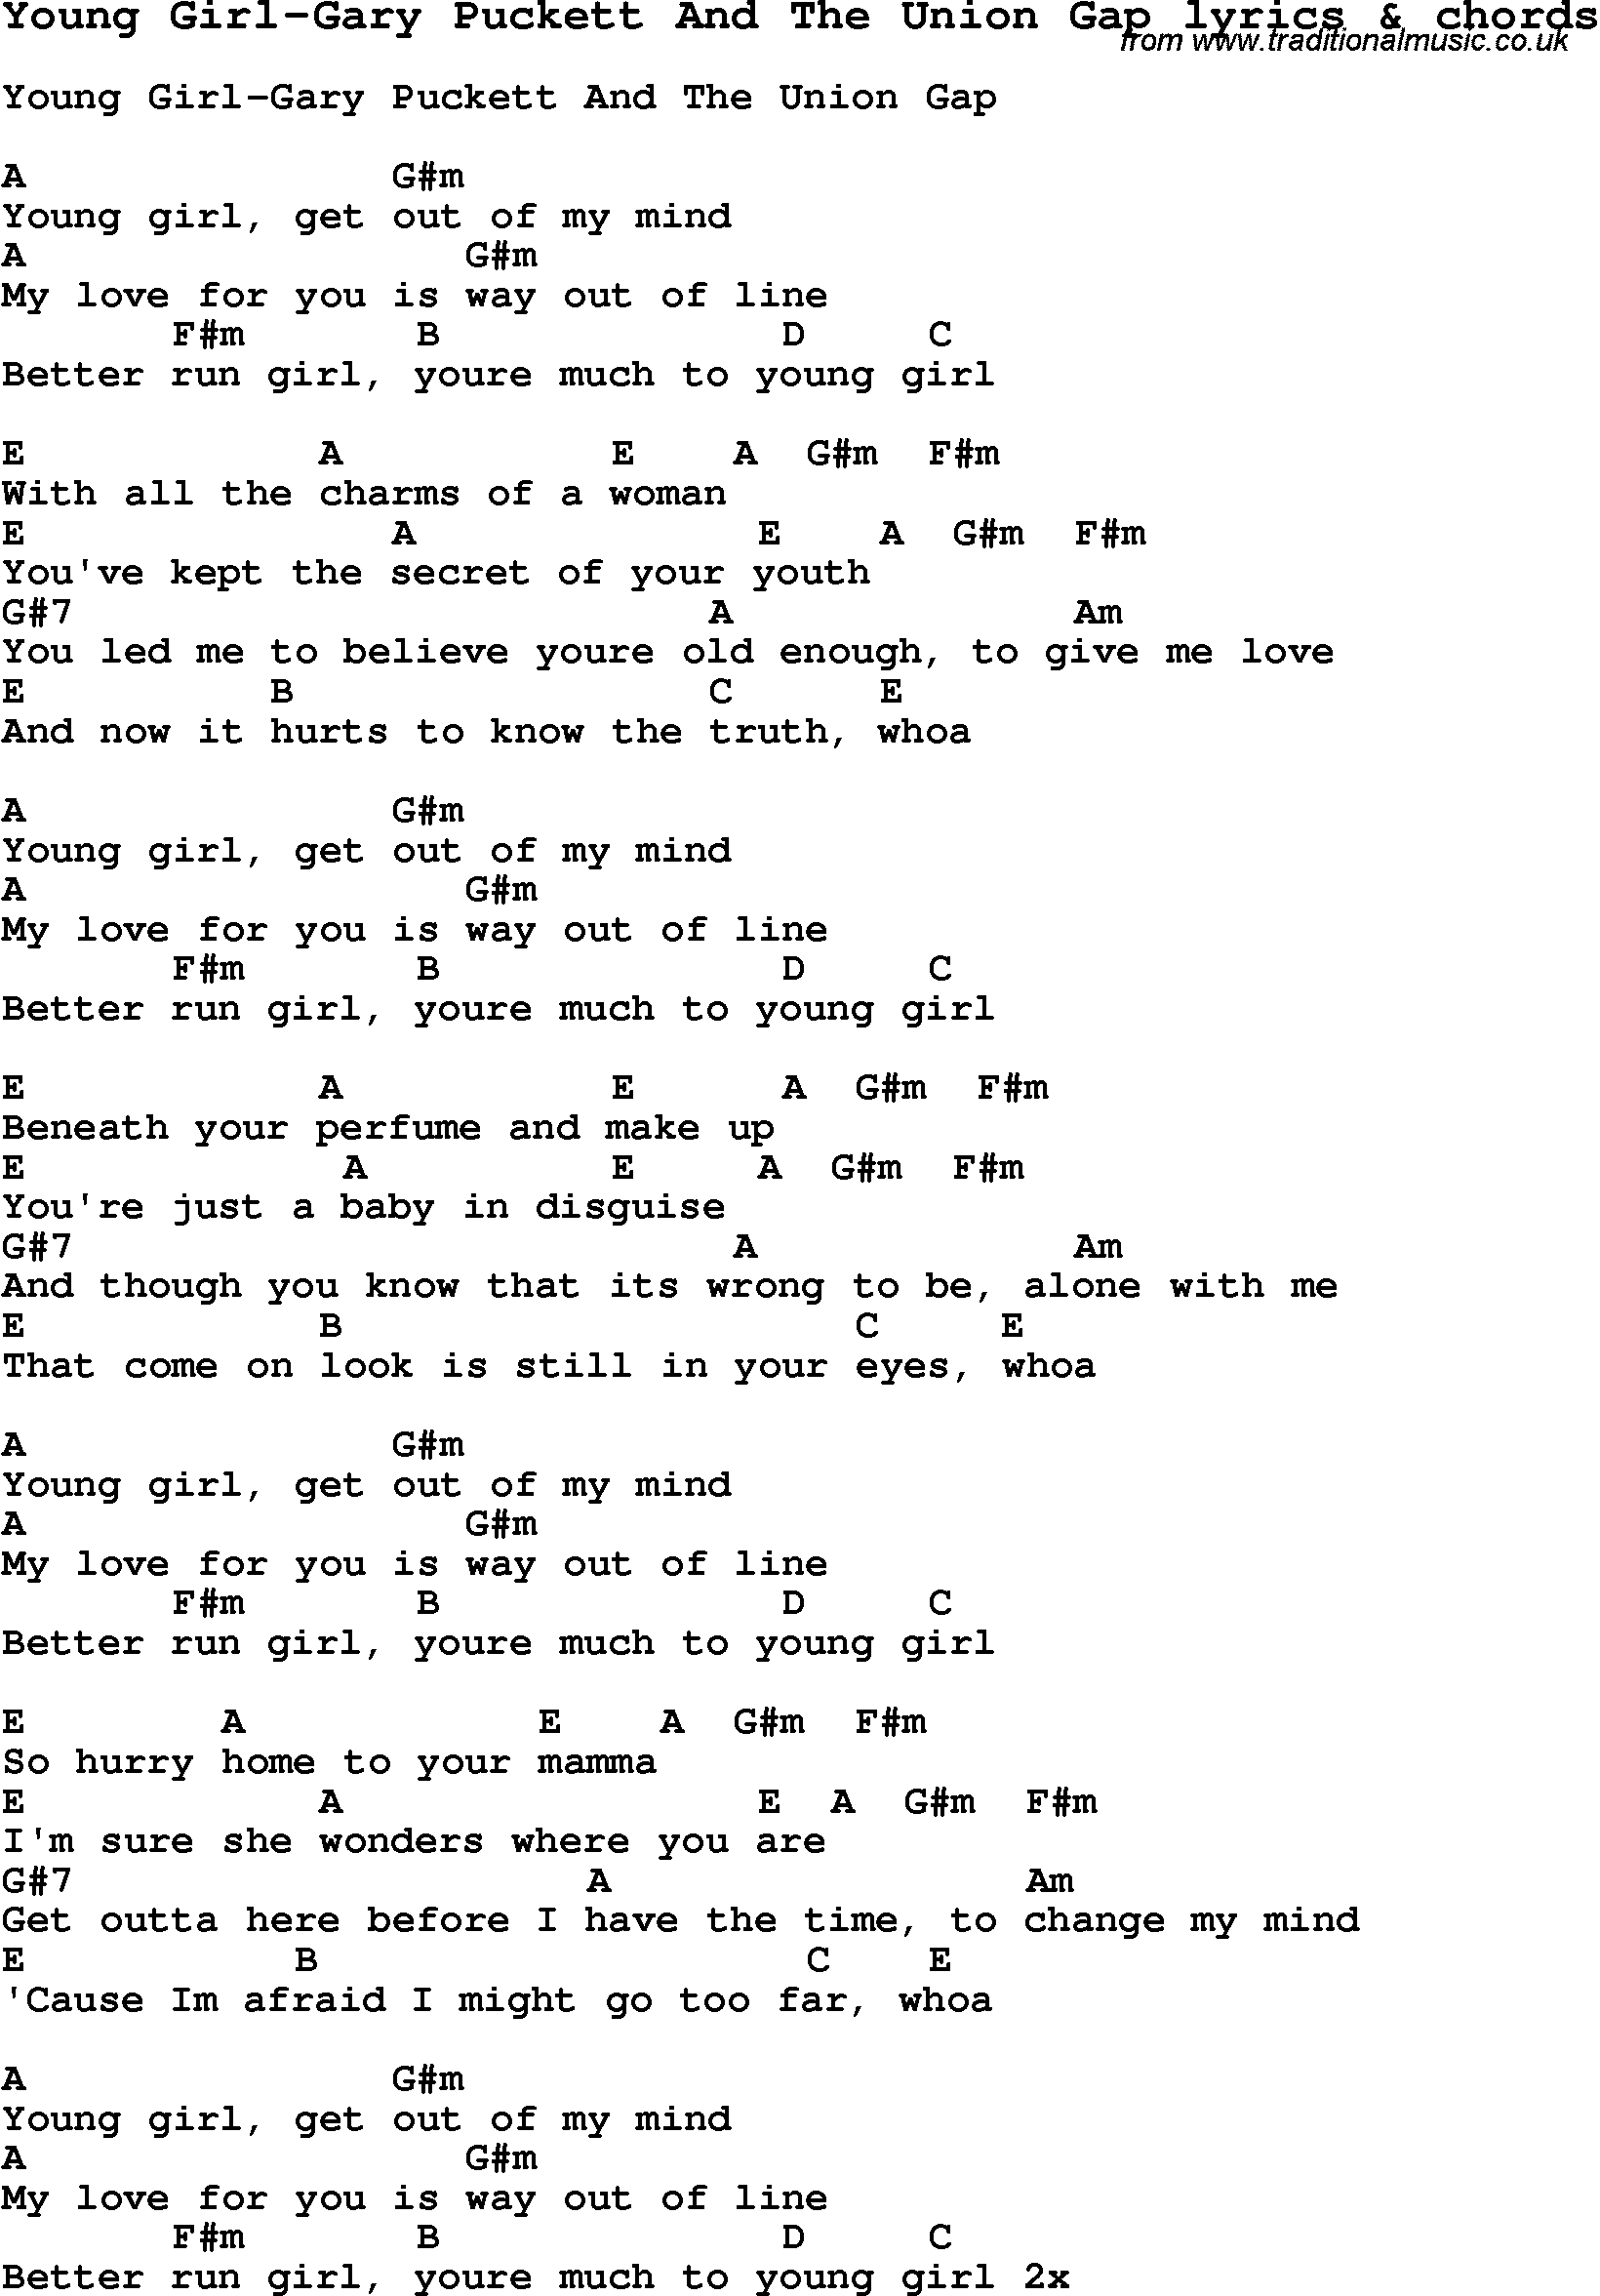 Love Song Lyrics for: Young Girl-Gary Puckett And The Union Gap with chords for Ukulele, Guitar Banjo etc.